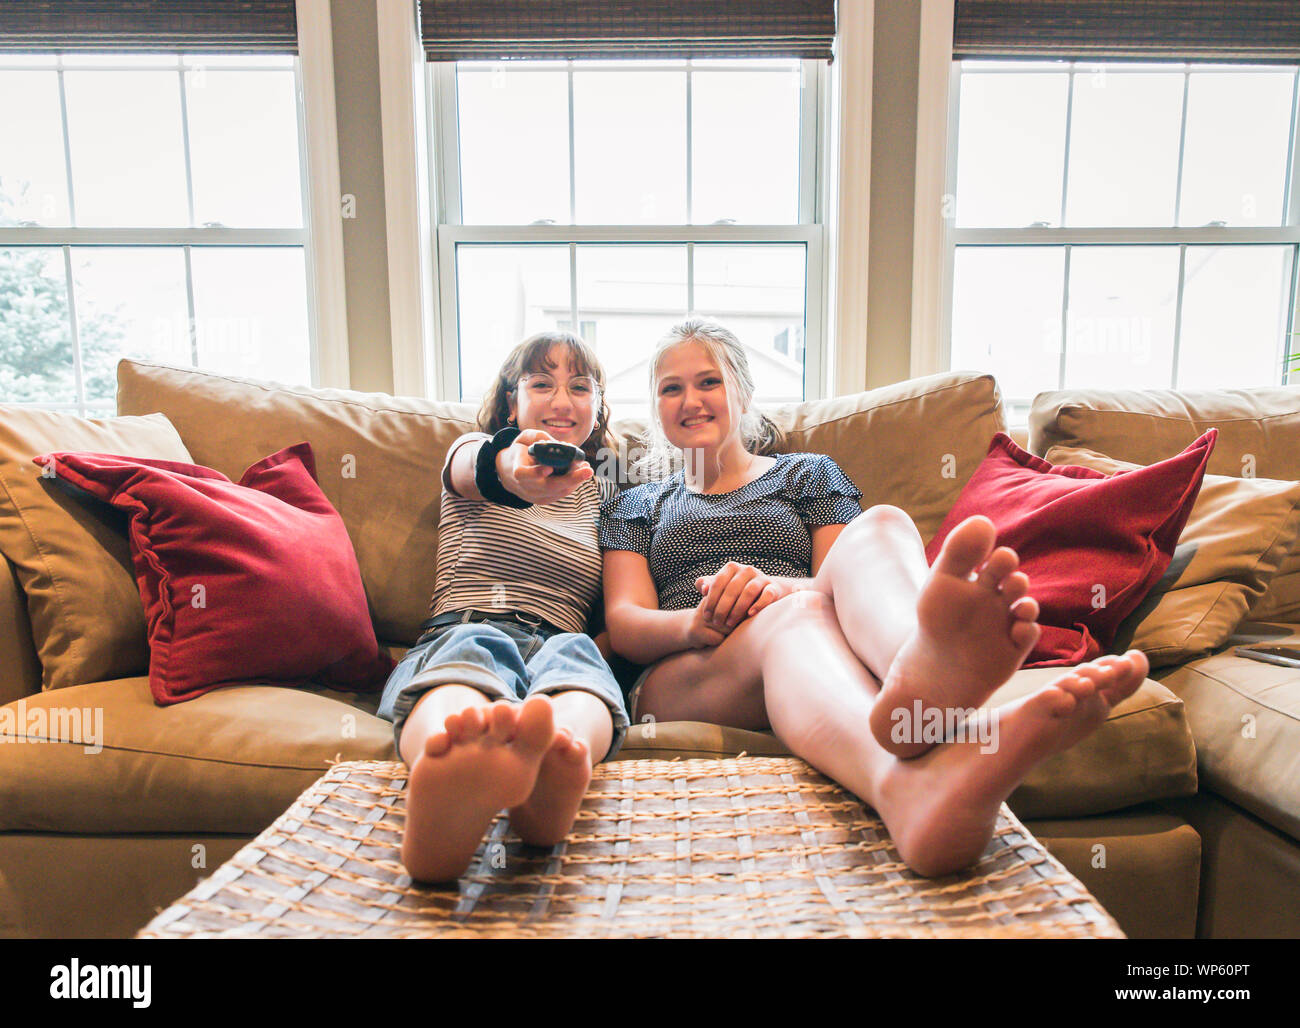 Two teenage girls sitting on a couch with feet up watching television. Stock Photo